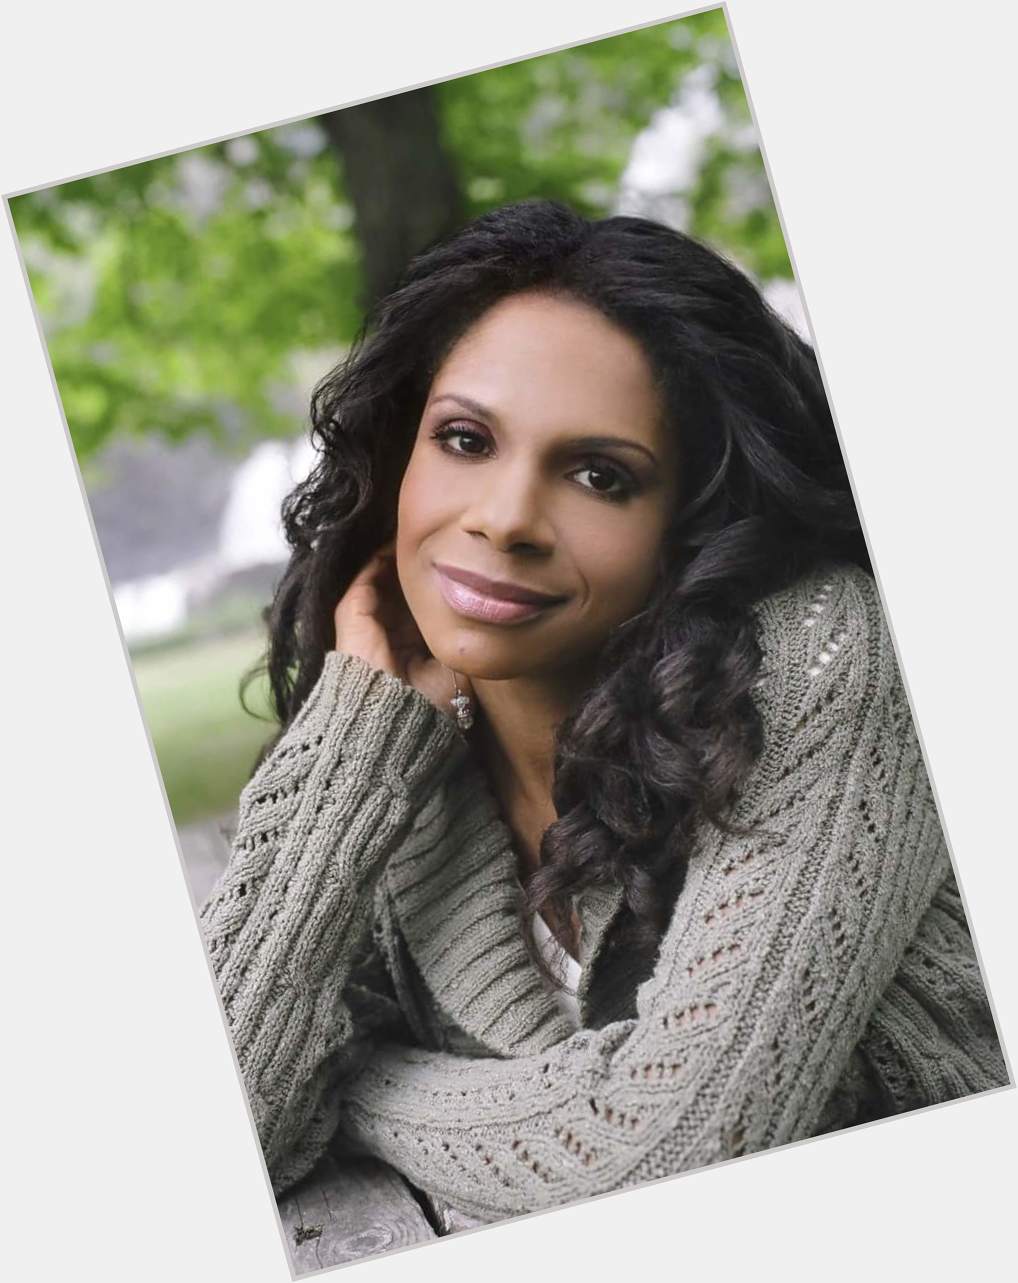 Happy birthday Audra McDonald.

Such a beauty and so much talent. 